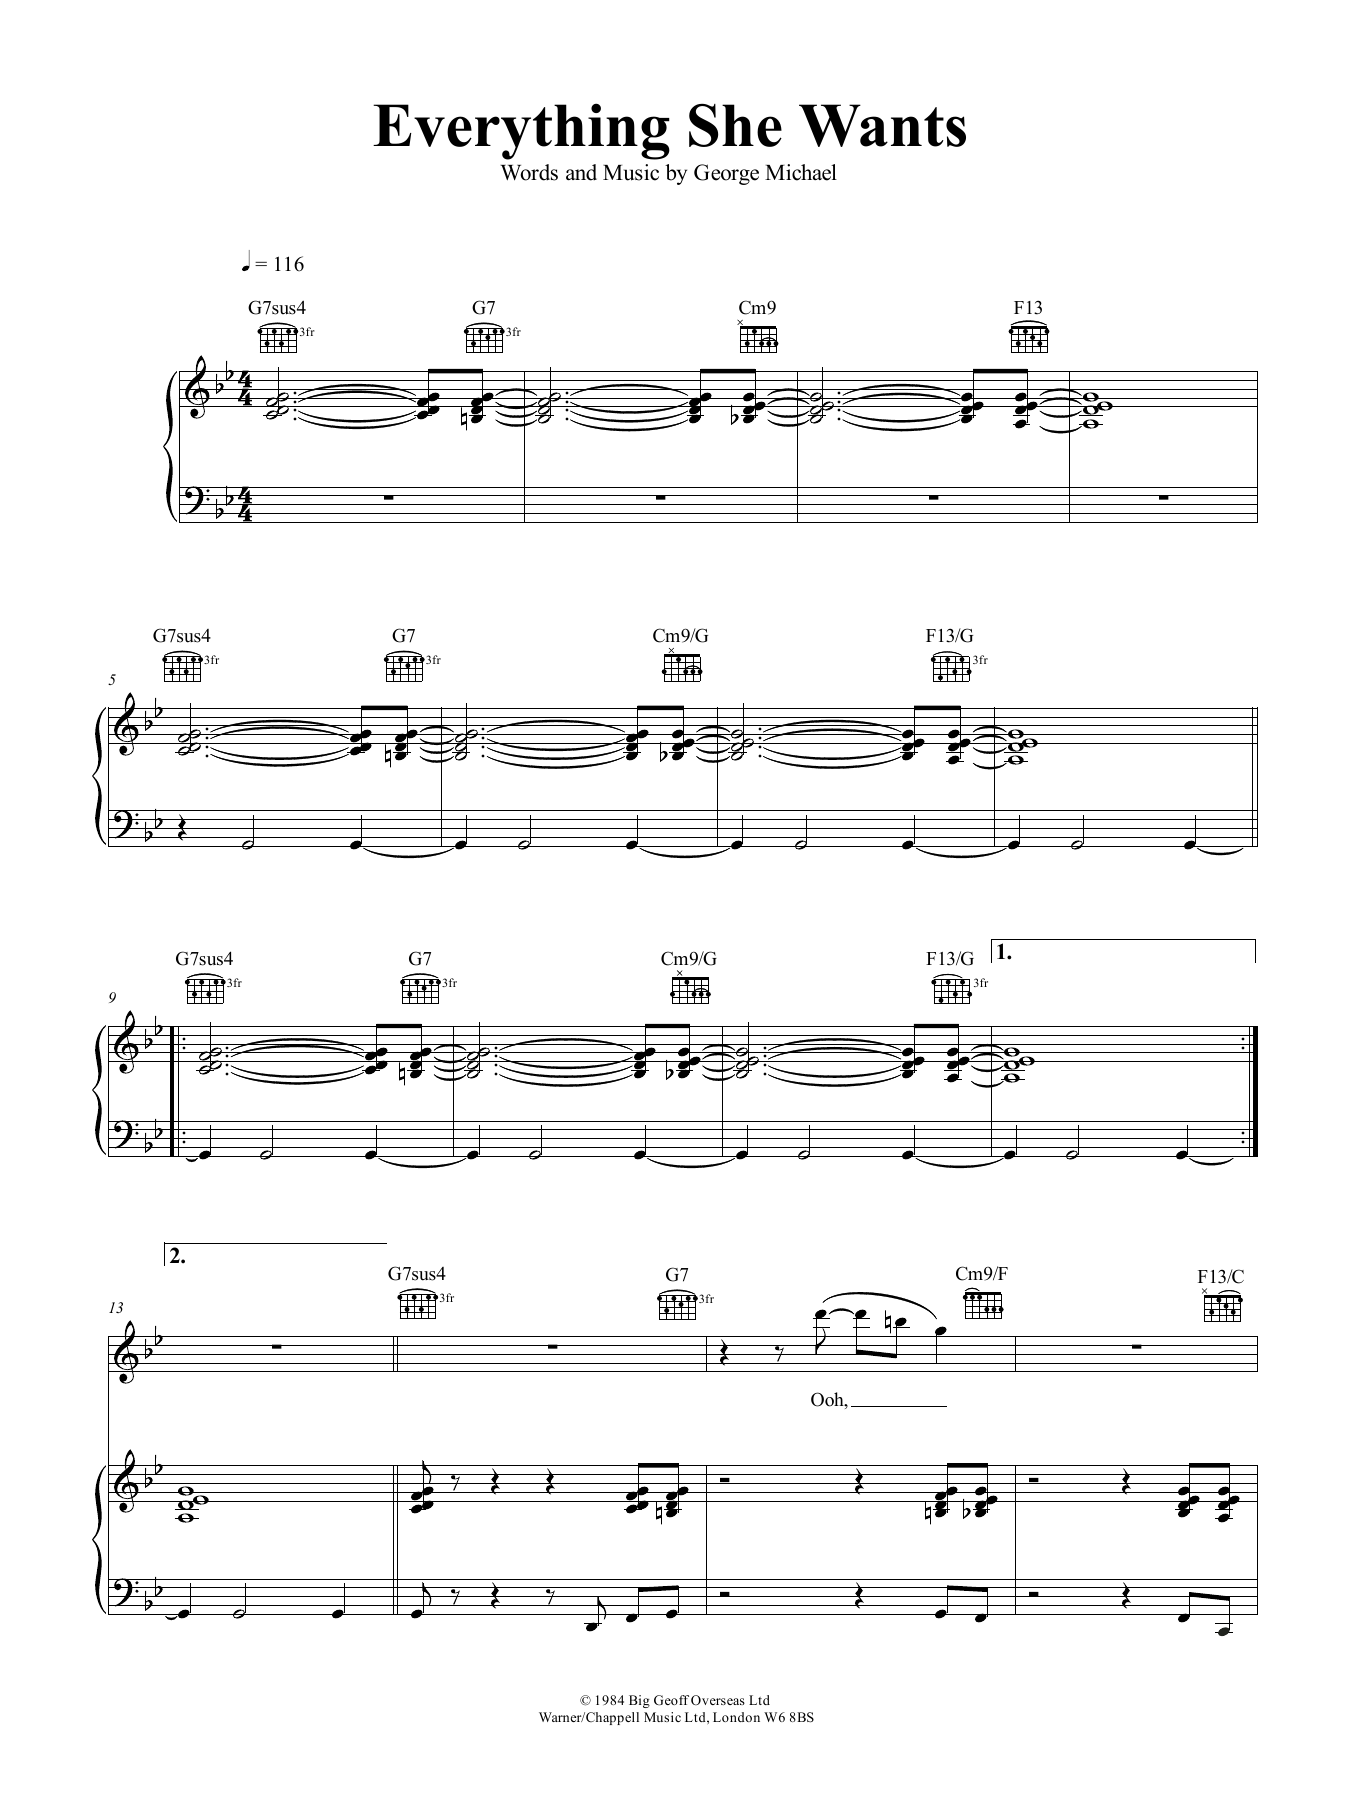 Download Wham! Everything She Wants Sheet Music